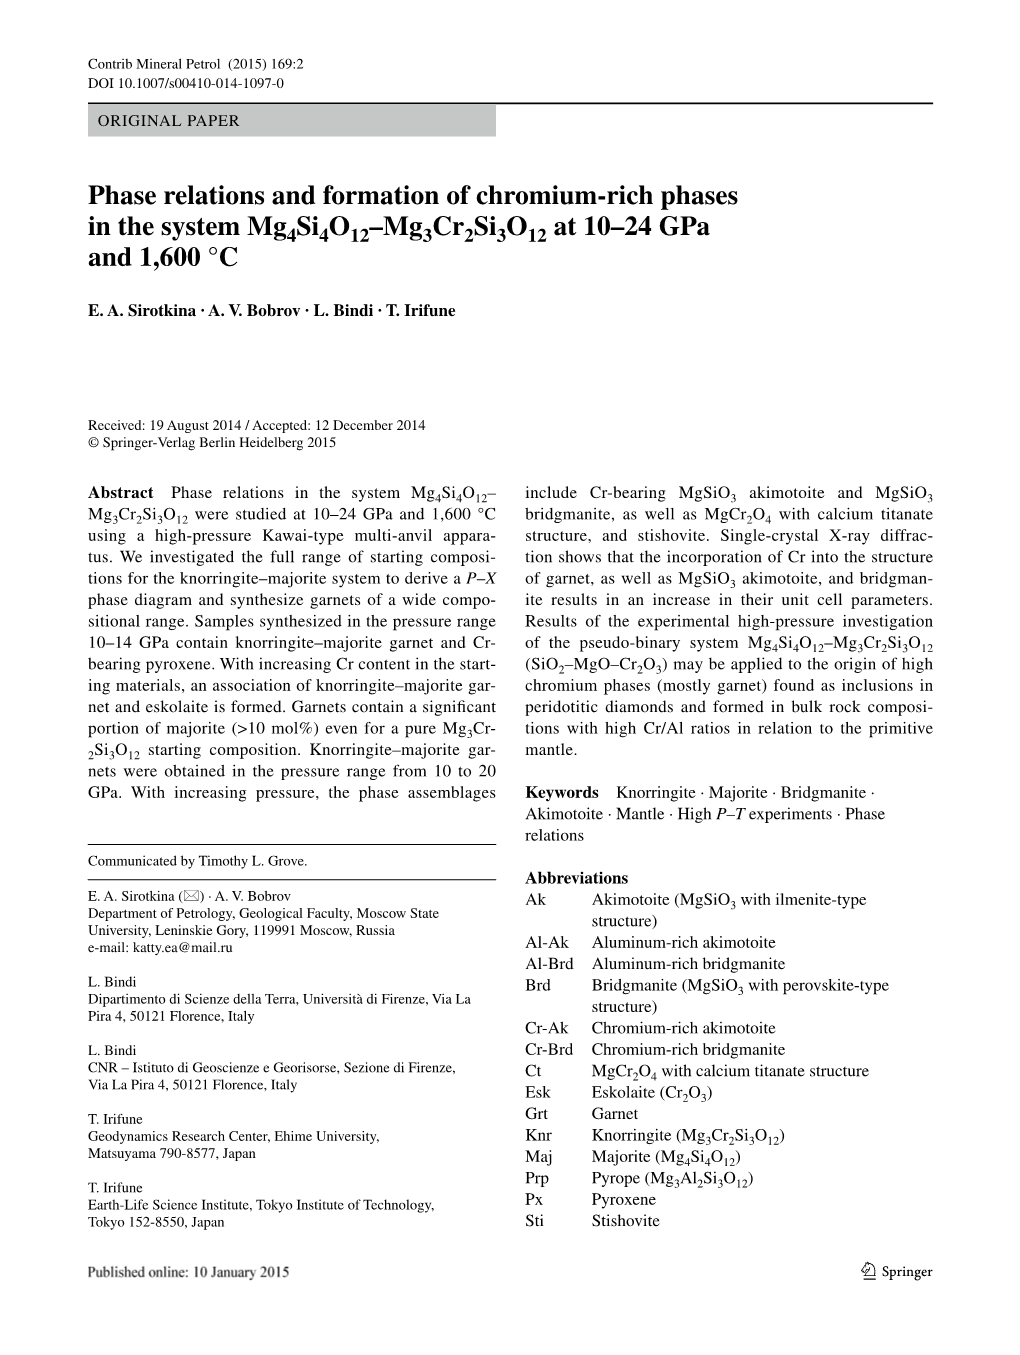 Phase Relations and Formation of Chromium‑Rich Phases in the System